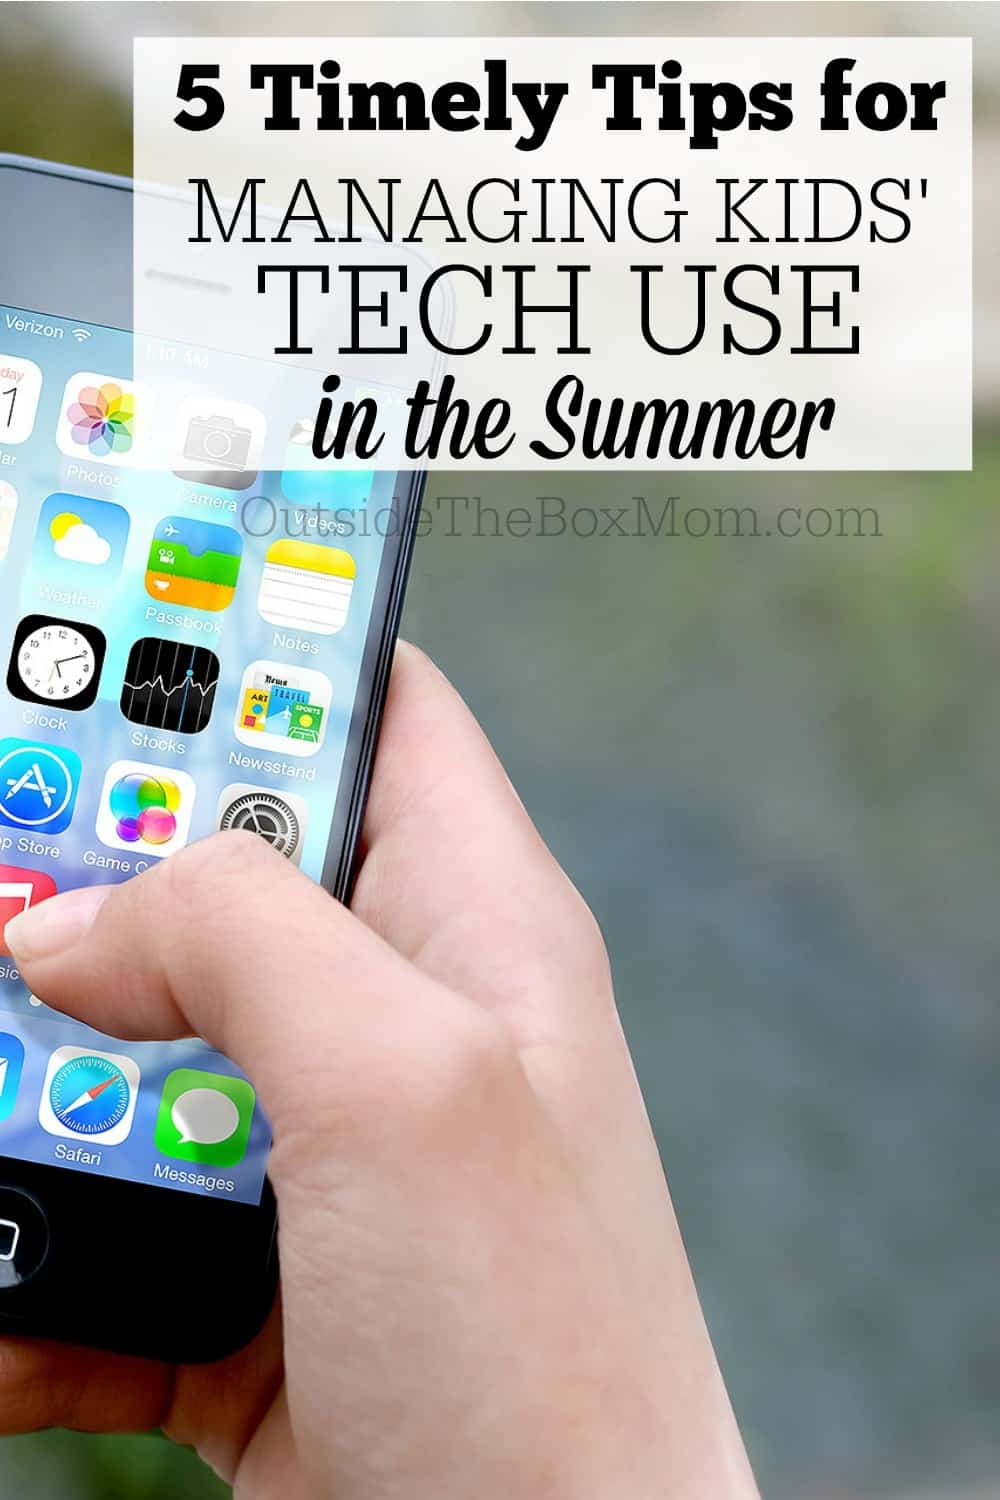 Summer brings a more relaxed schedule and a lot more free time for the kids. If your kids reach for the cell phone or tablet before anything else, you don't want to miss these timely tips for managing your kids' tech use this summer.